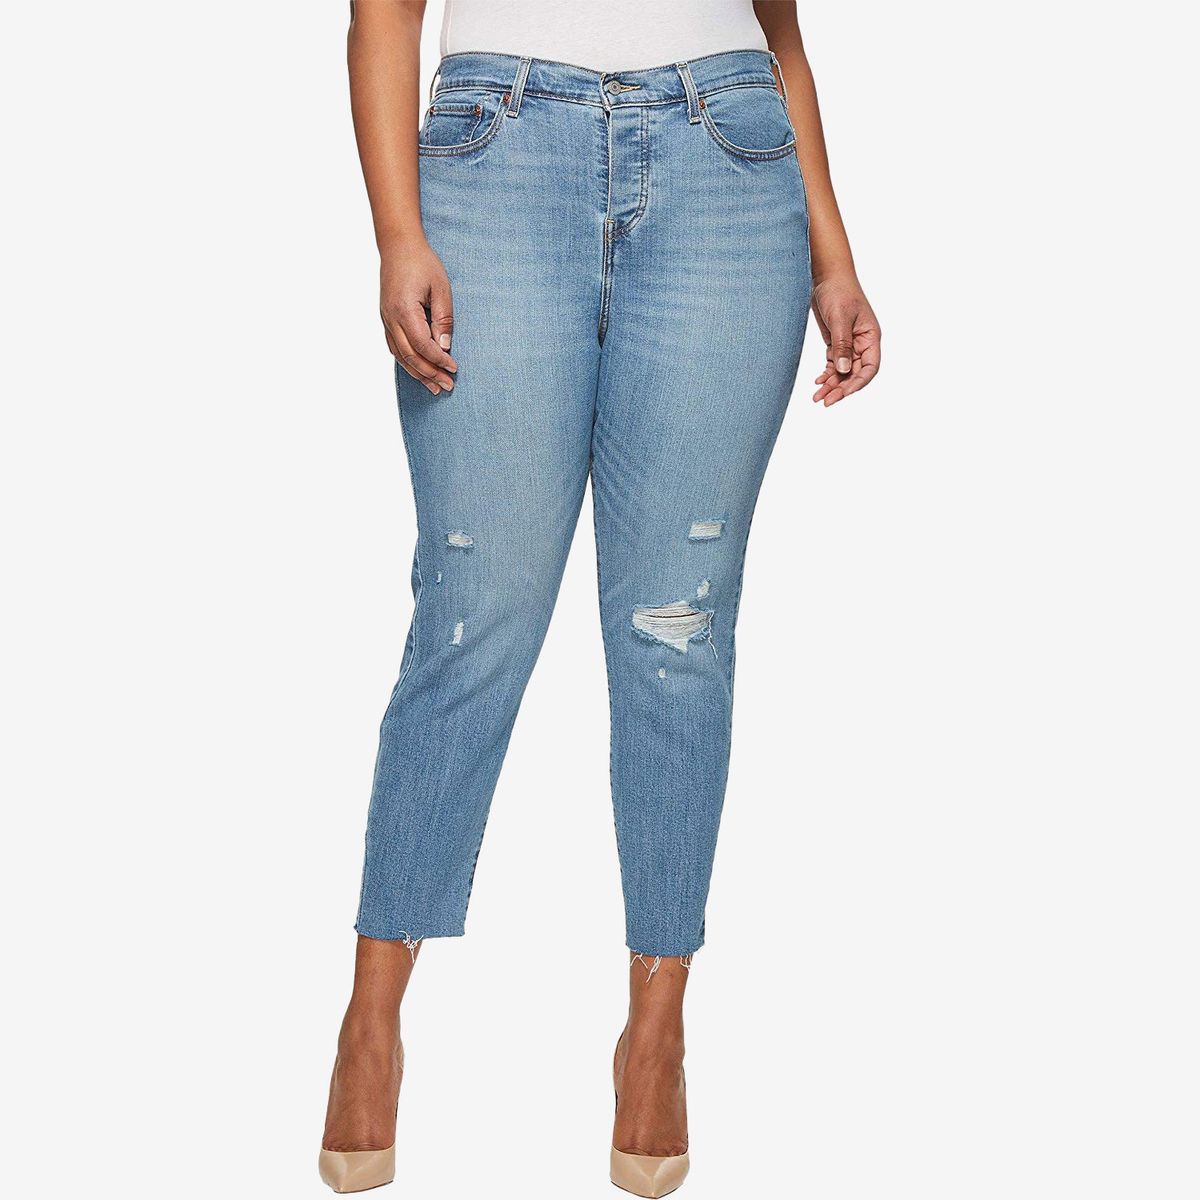 levi for women's jeans